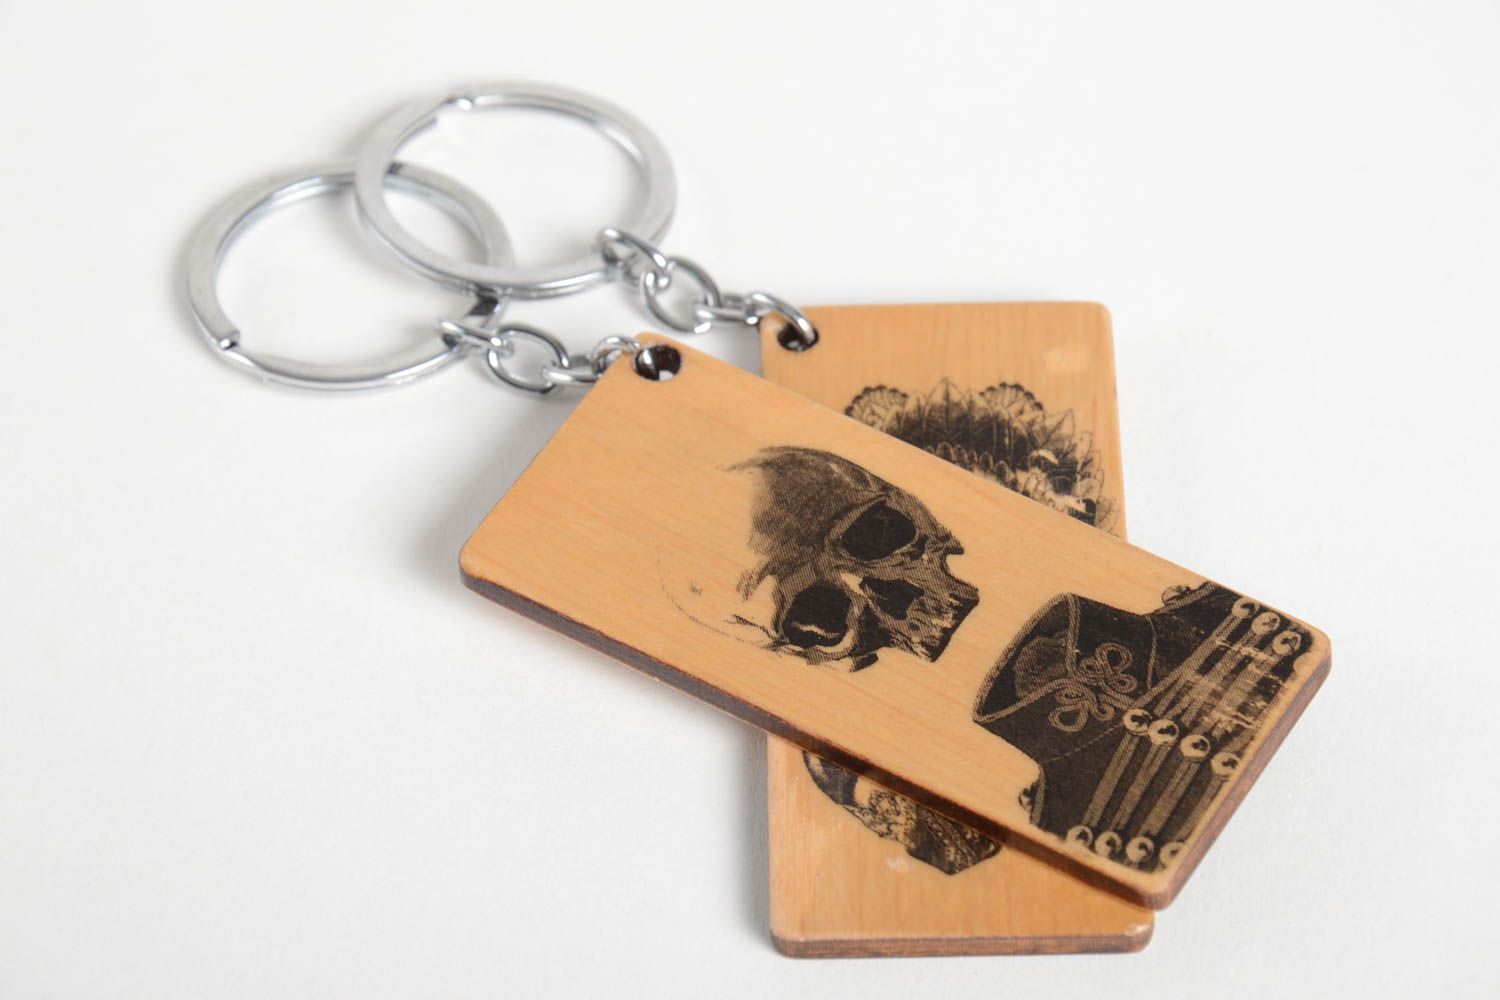 Handmade keychains wooden gifts key accessories 2 key rings unique gifts photo 3